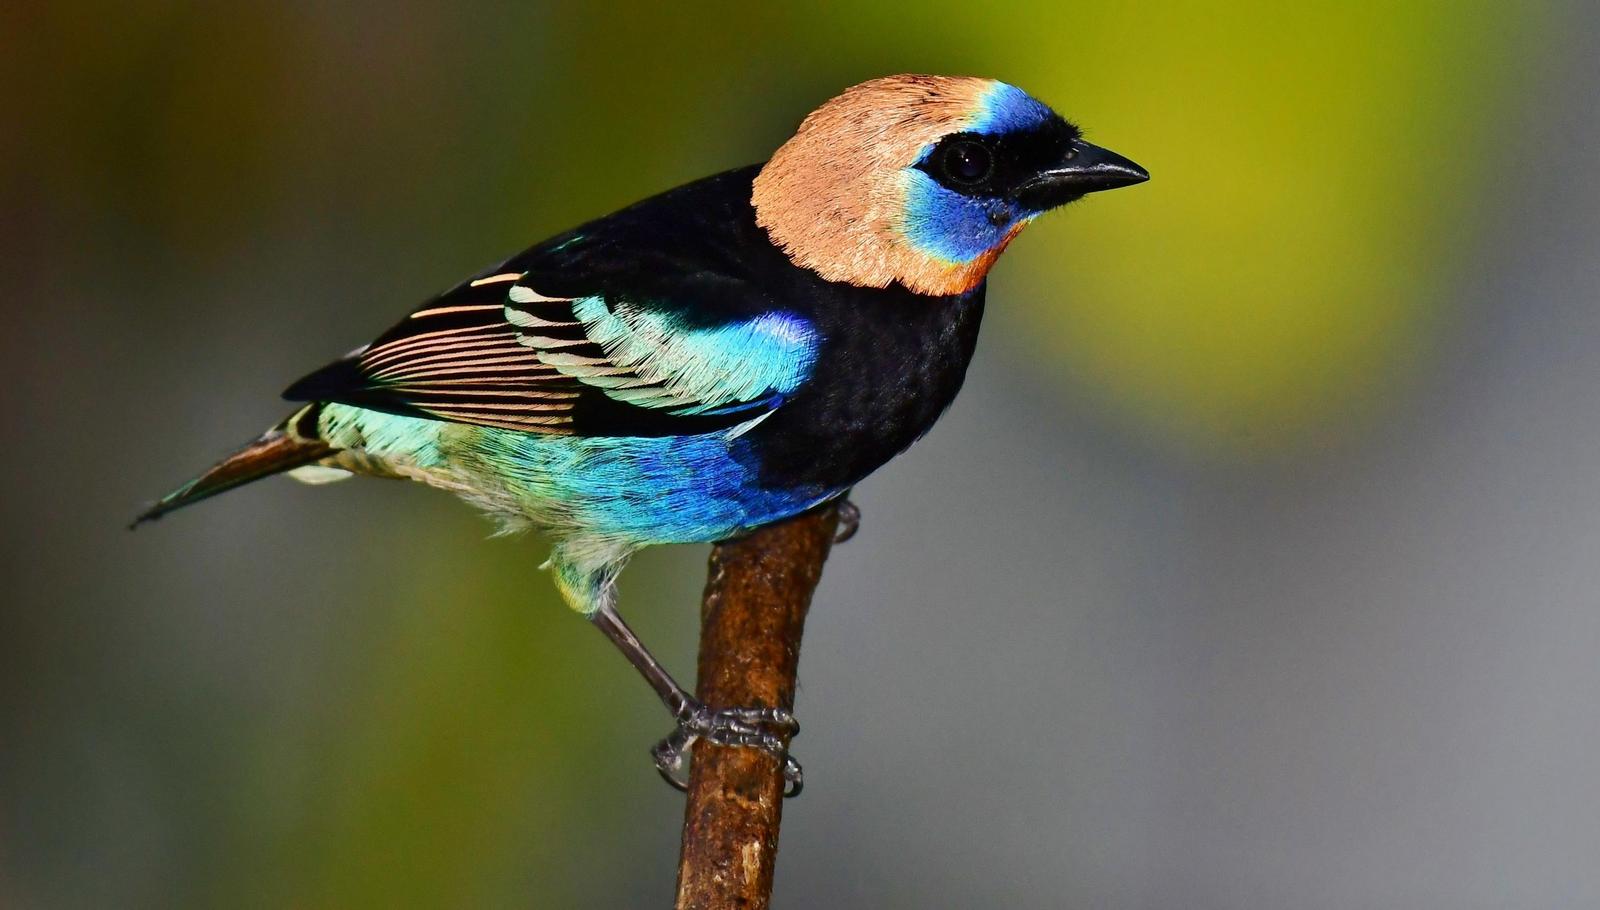 Golden-hooded Tanager Photo by Gareth Rasberry